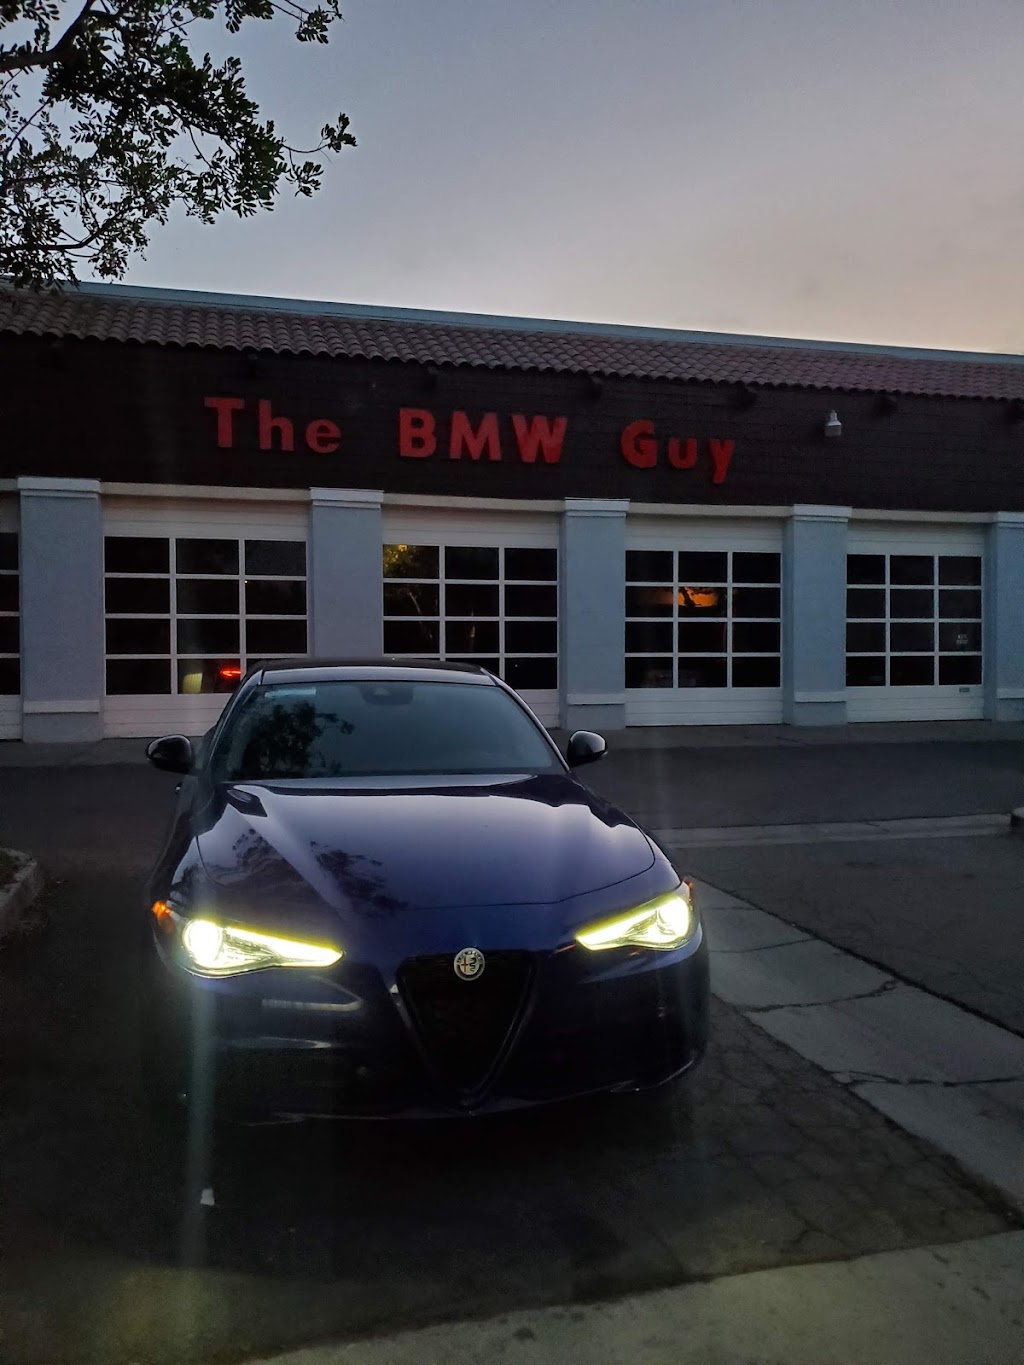 The BMW Guy | 1288 W San Marcos Blvd Suite 117, San Marcos, CA 92078, USA | Phone: (760) 716-4677